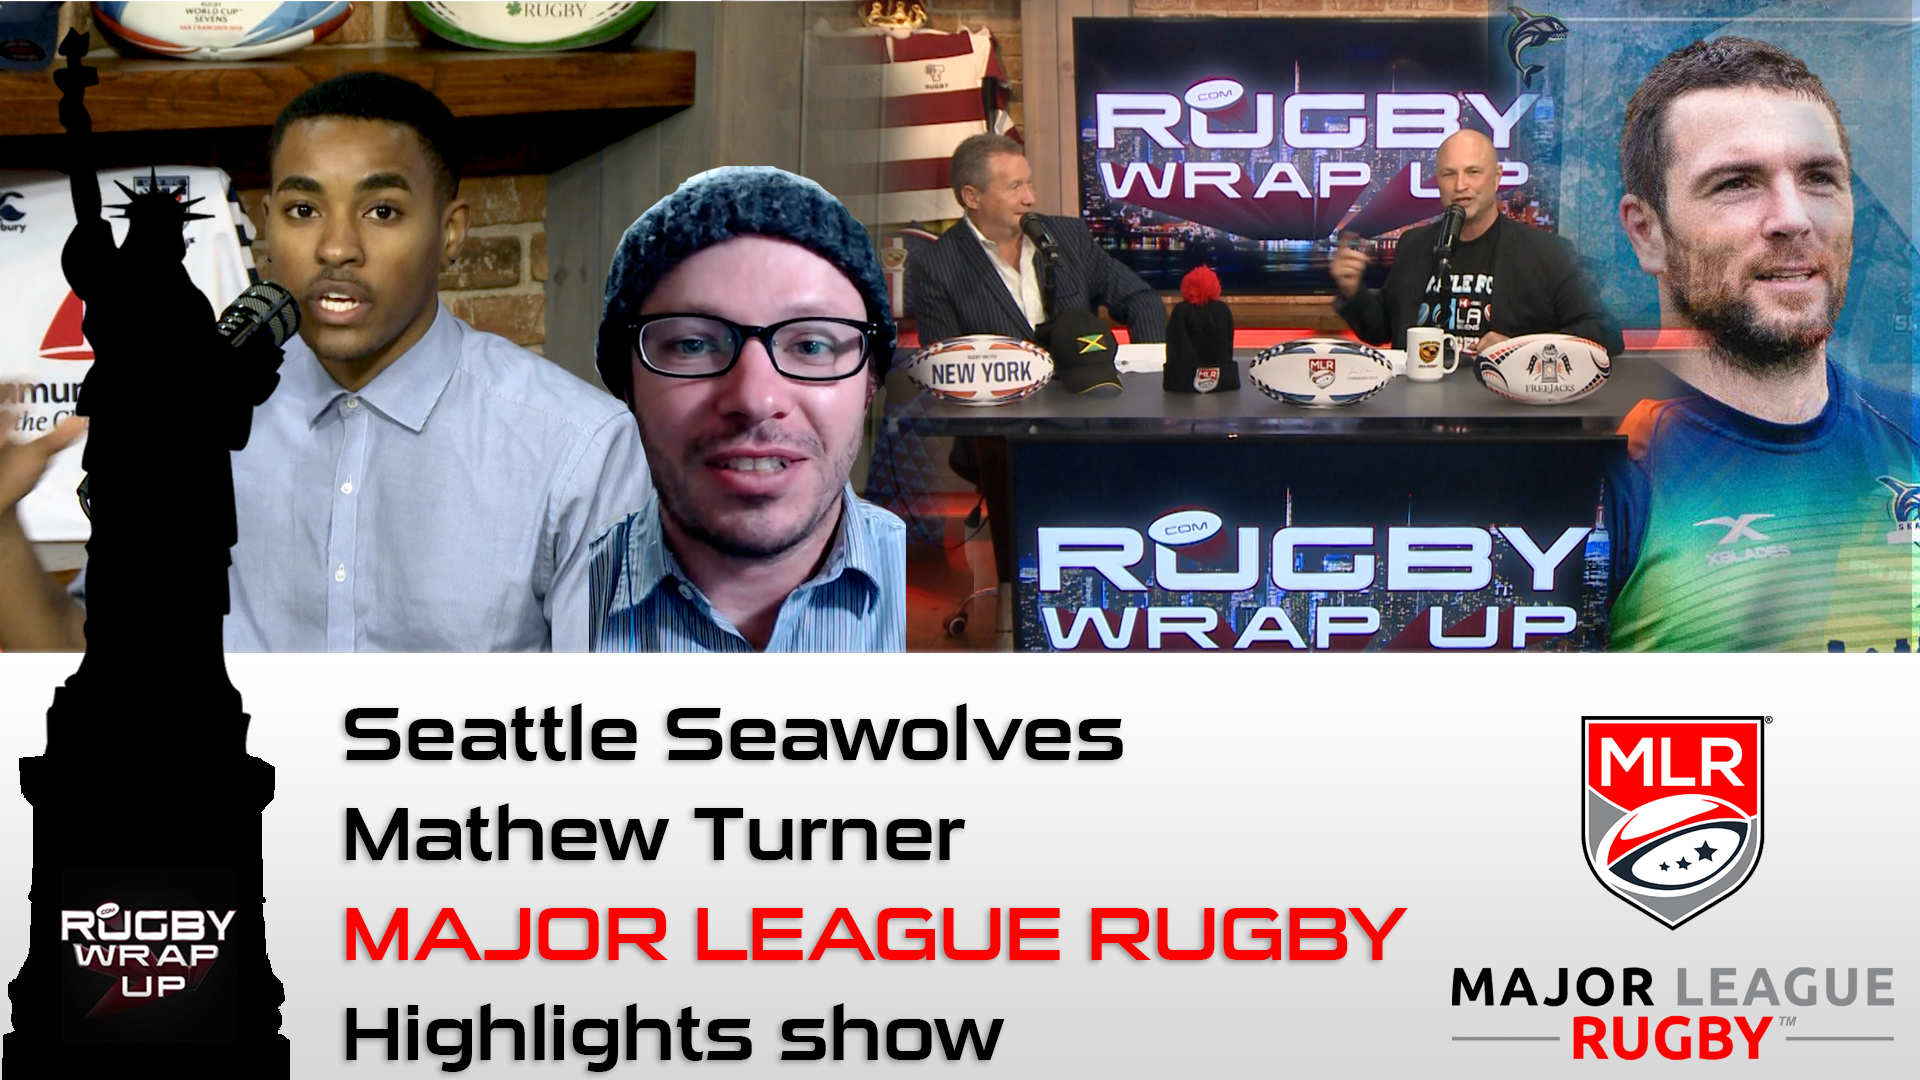 Seattle Seawolves, Rugby_Wrap_Up, Mathew Turner, MAJOR LEAGUE RUGBY Highlights show